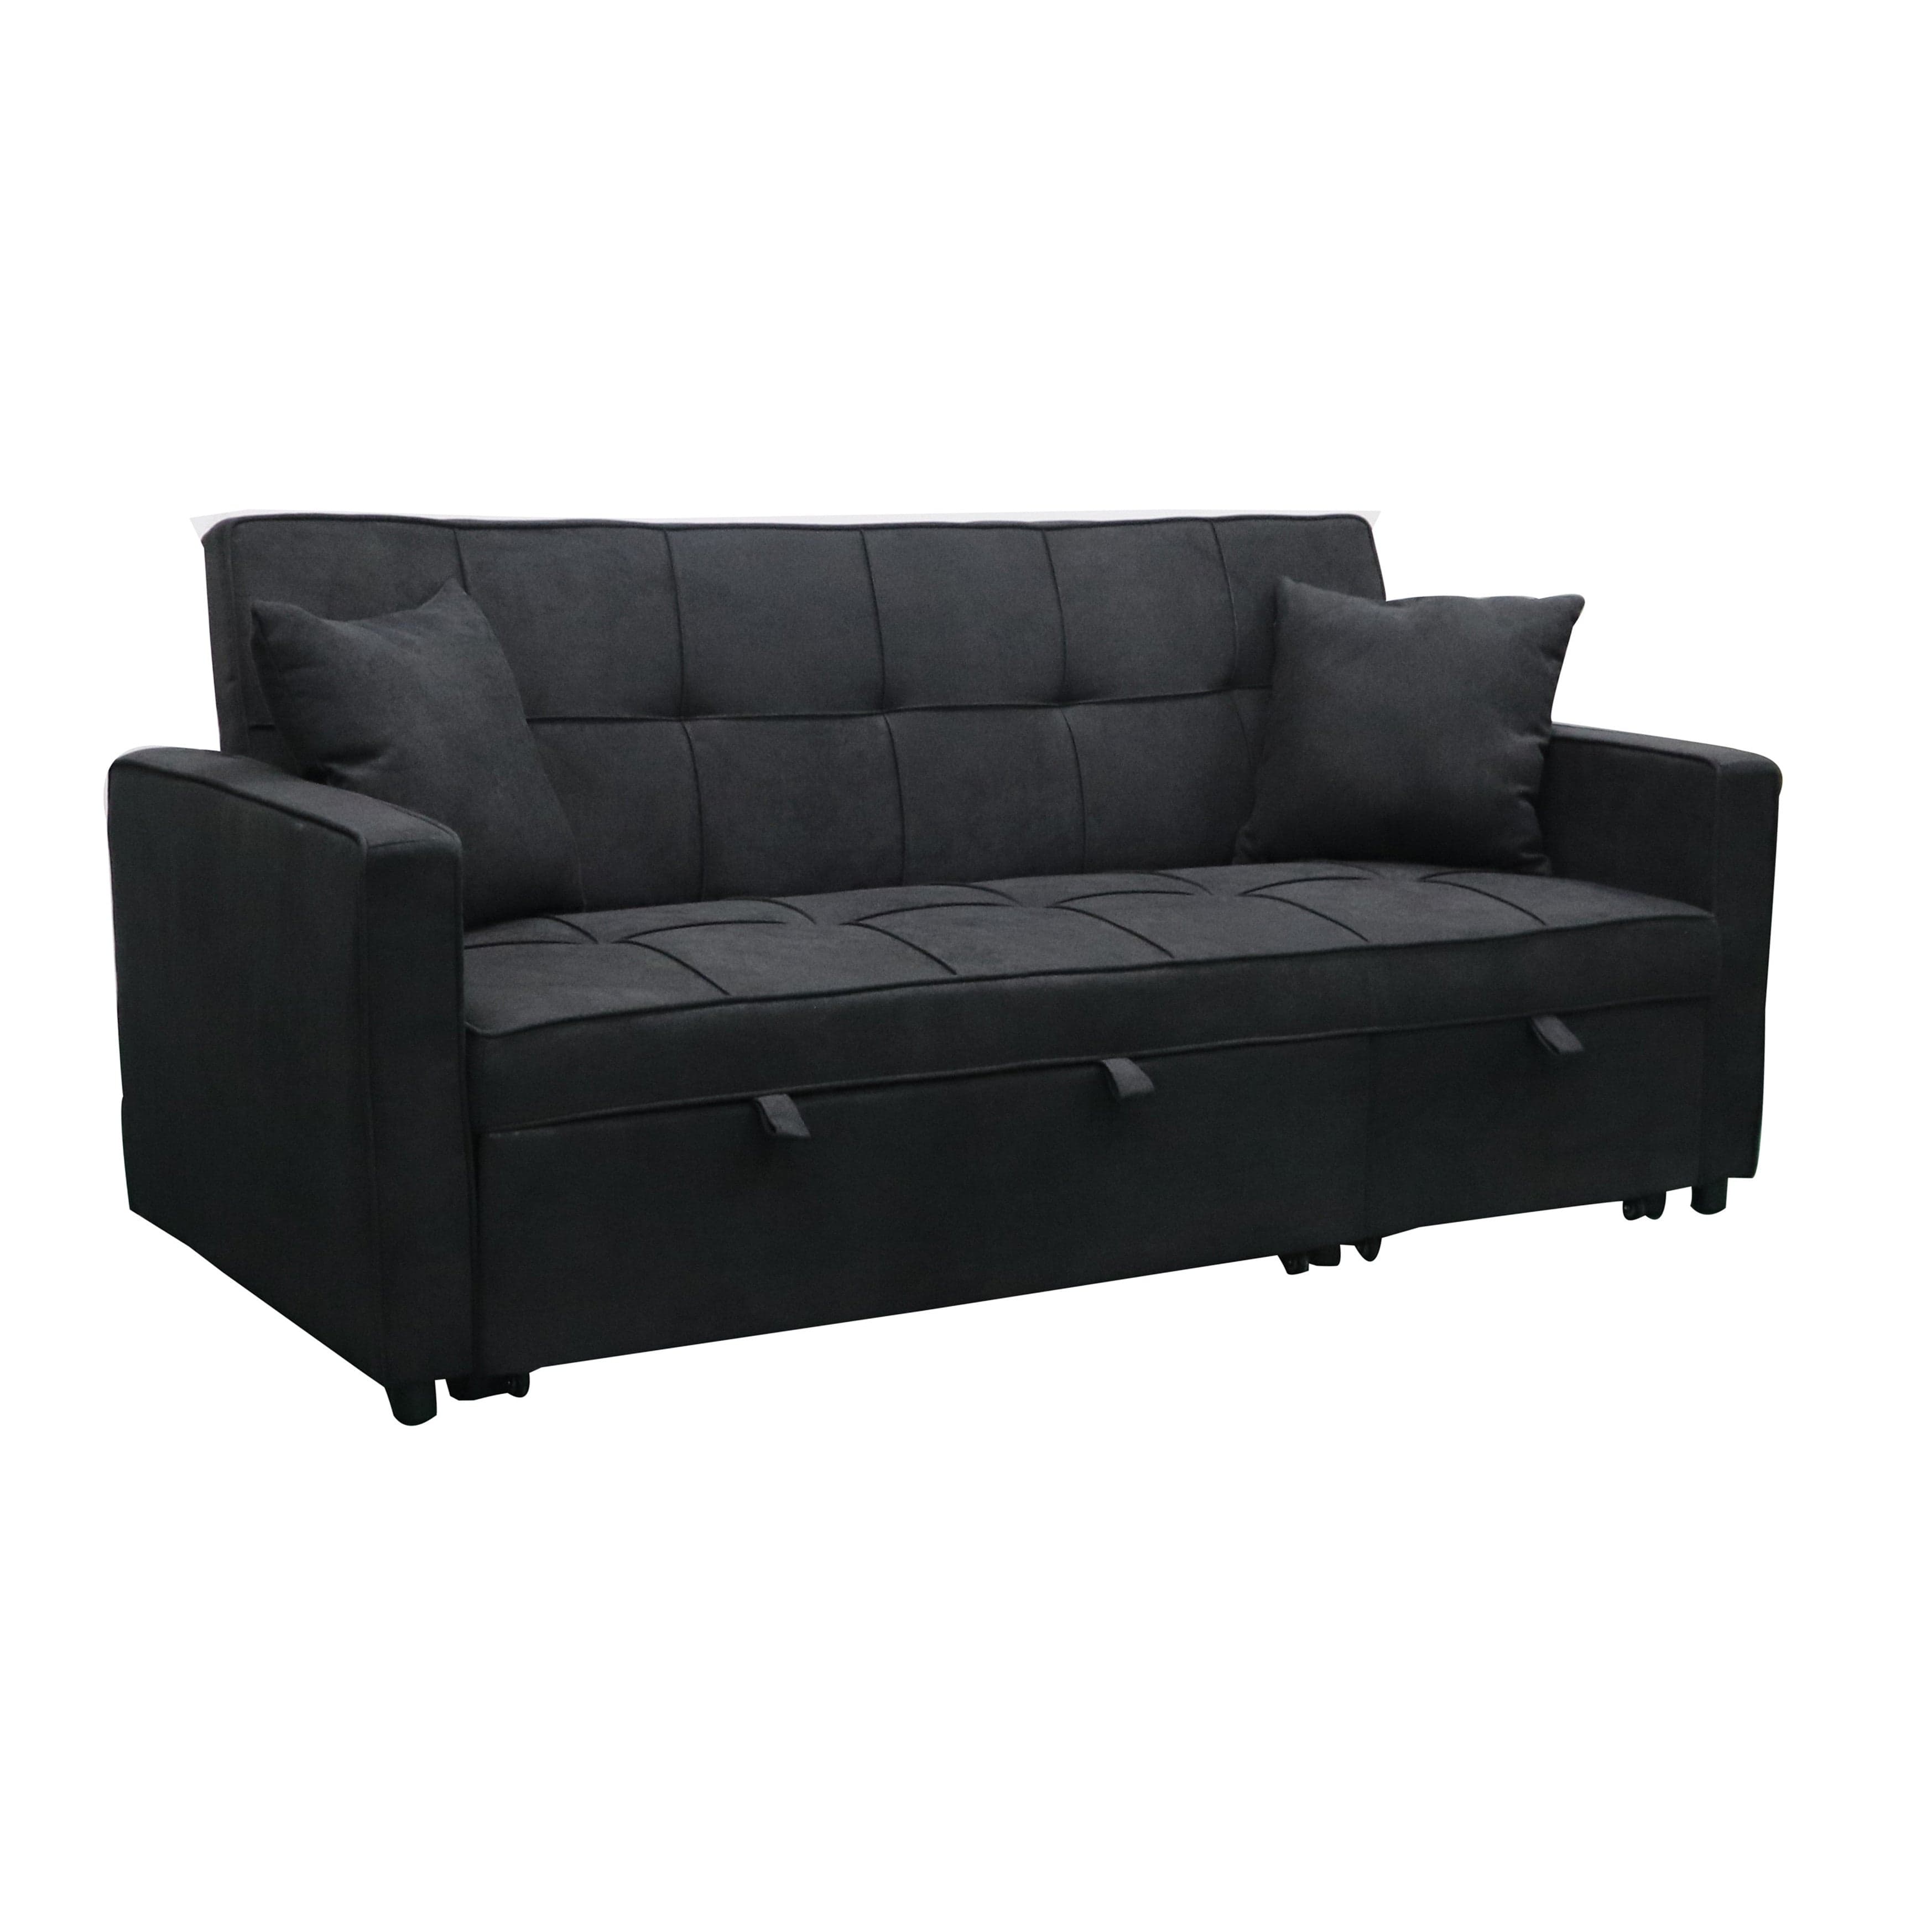 Multi-Functional Hartford Sofa Bed with Pullout Chaise - Black